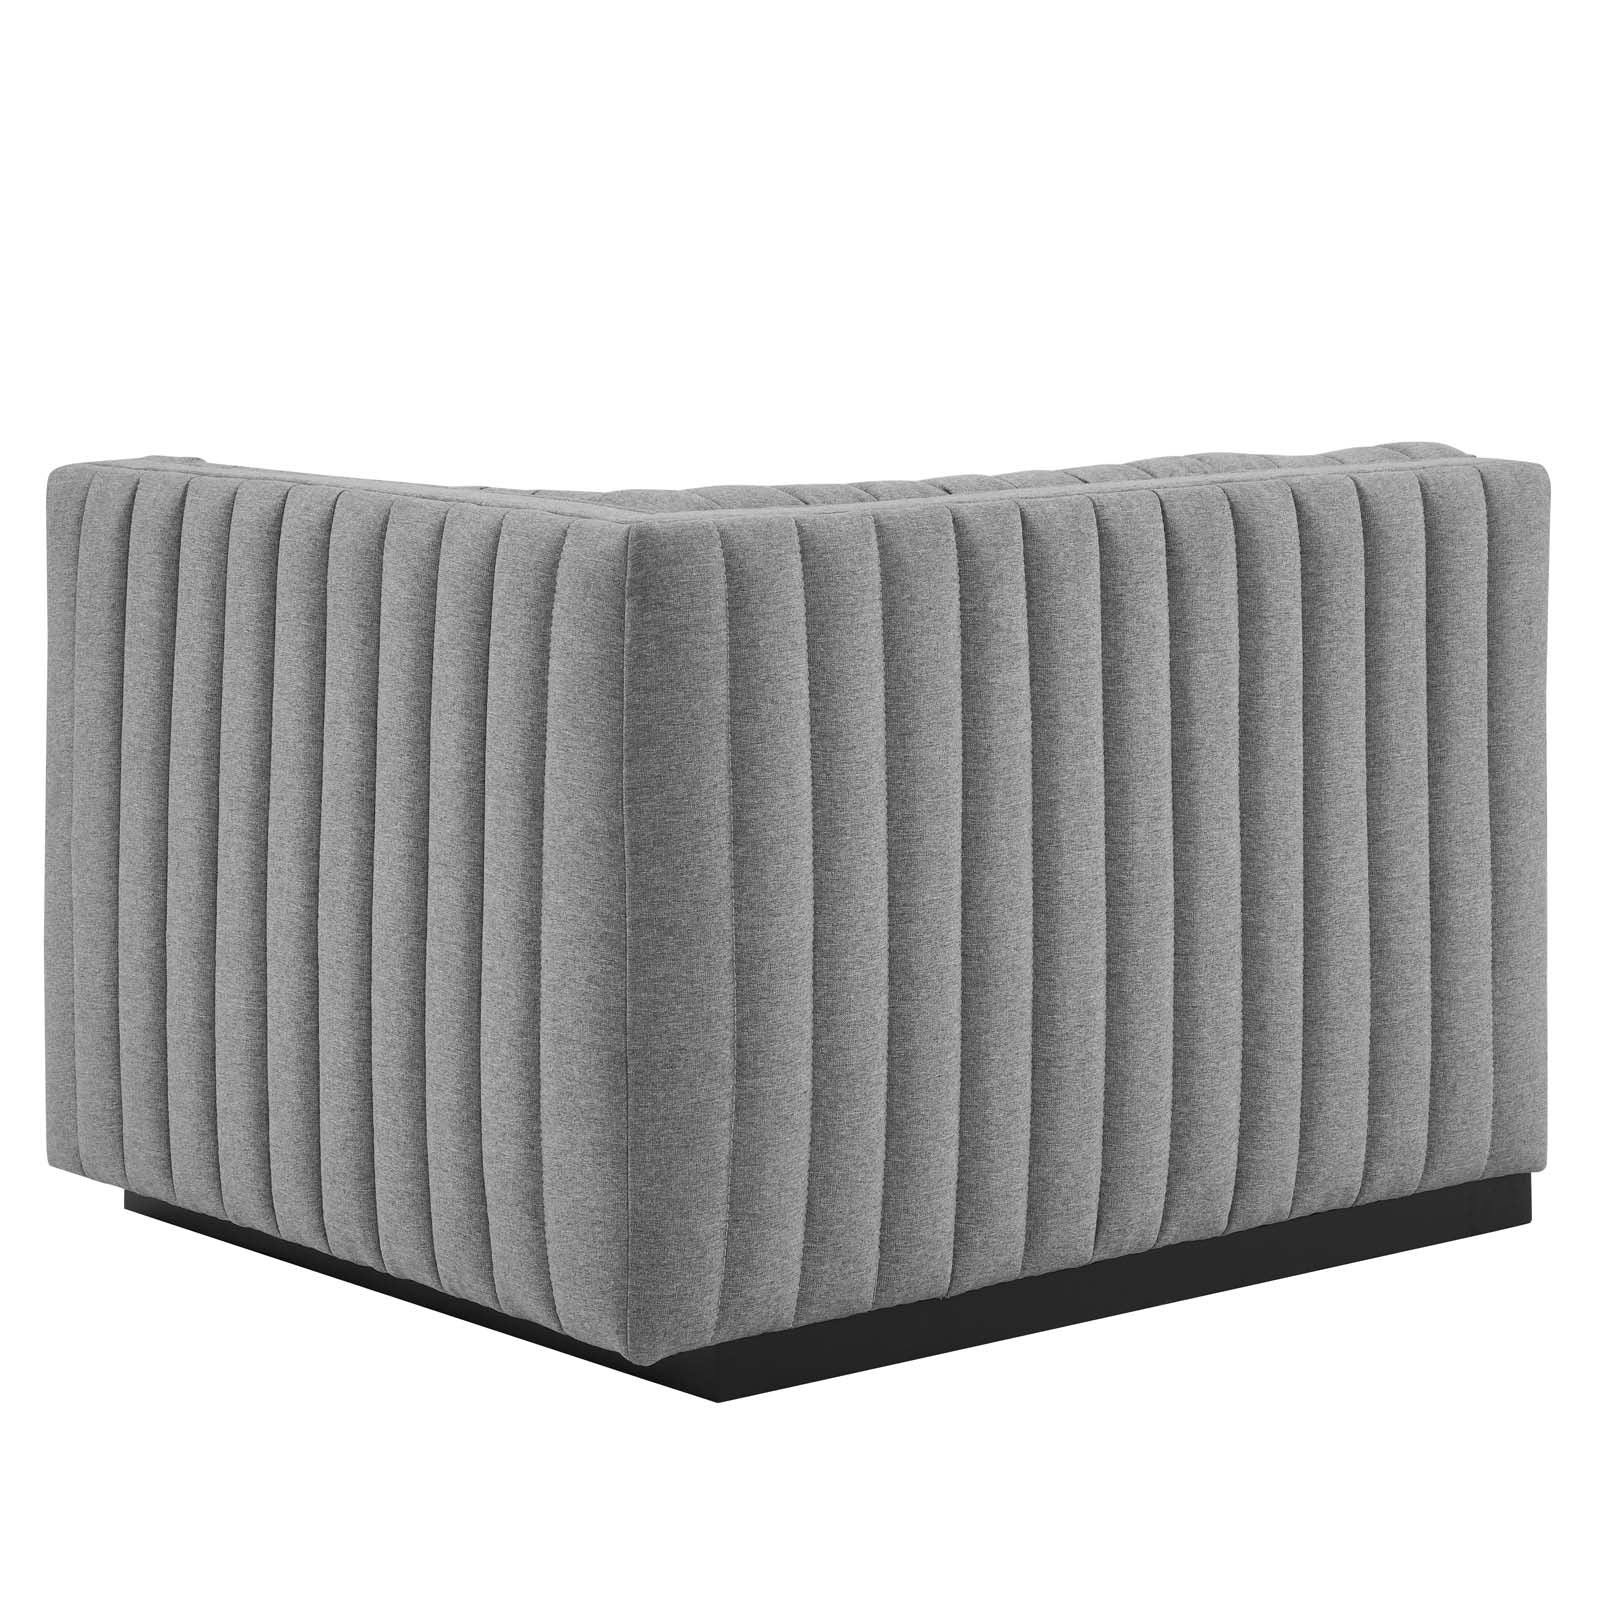 Modway Sectional Sofas - Conjure Channel Tufted Upholstered Fabric 6-Piece U-Shaped Sectional Black Light Gray